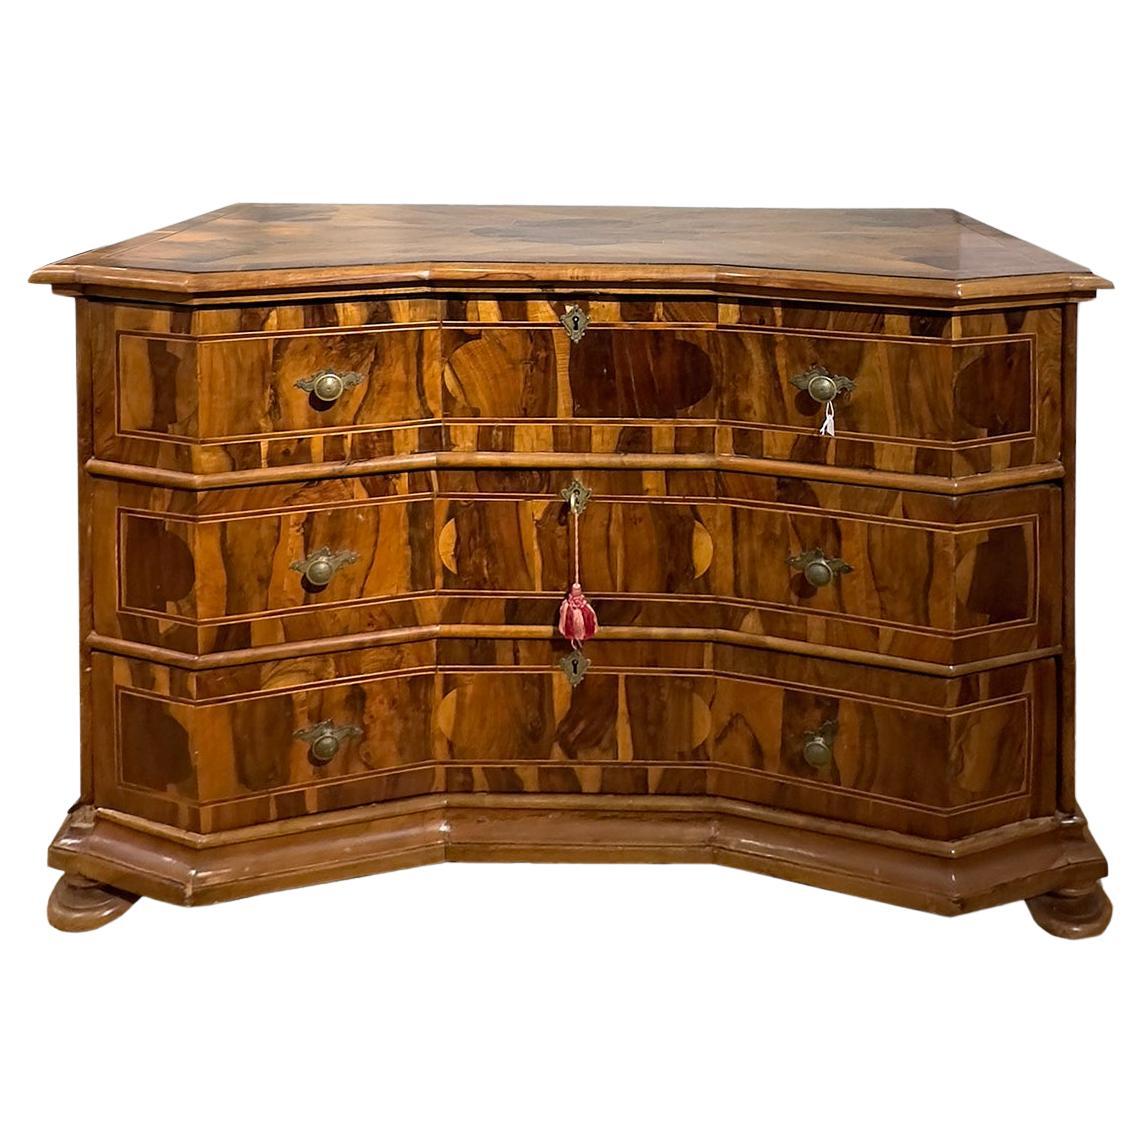 18th CENTURY VENETIAN VENEREED AND INLAID CHEST For Sale